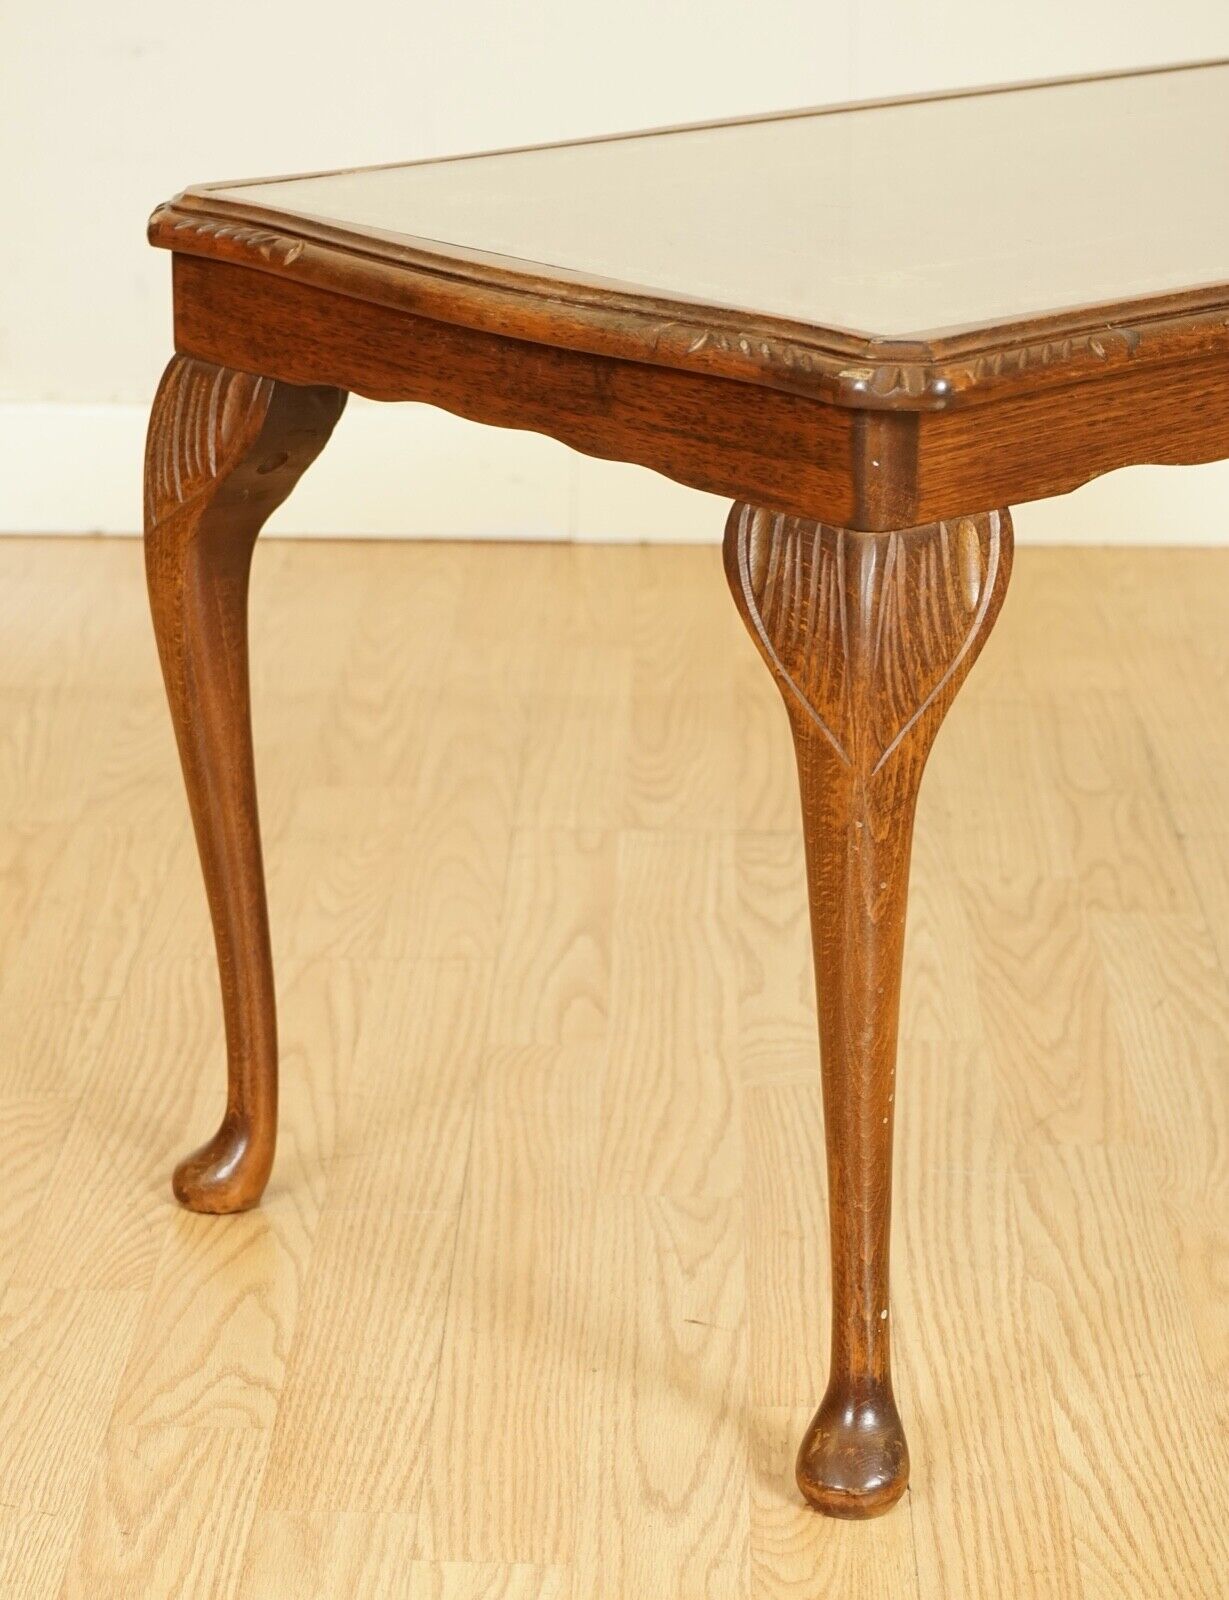 STUNNING VINTAGE BROWN LEATHER TOP COFFE TABLE WITH QUEEN ANNE LEGS